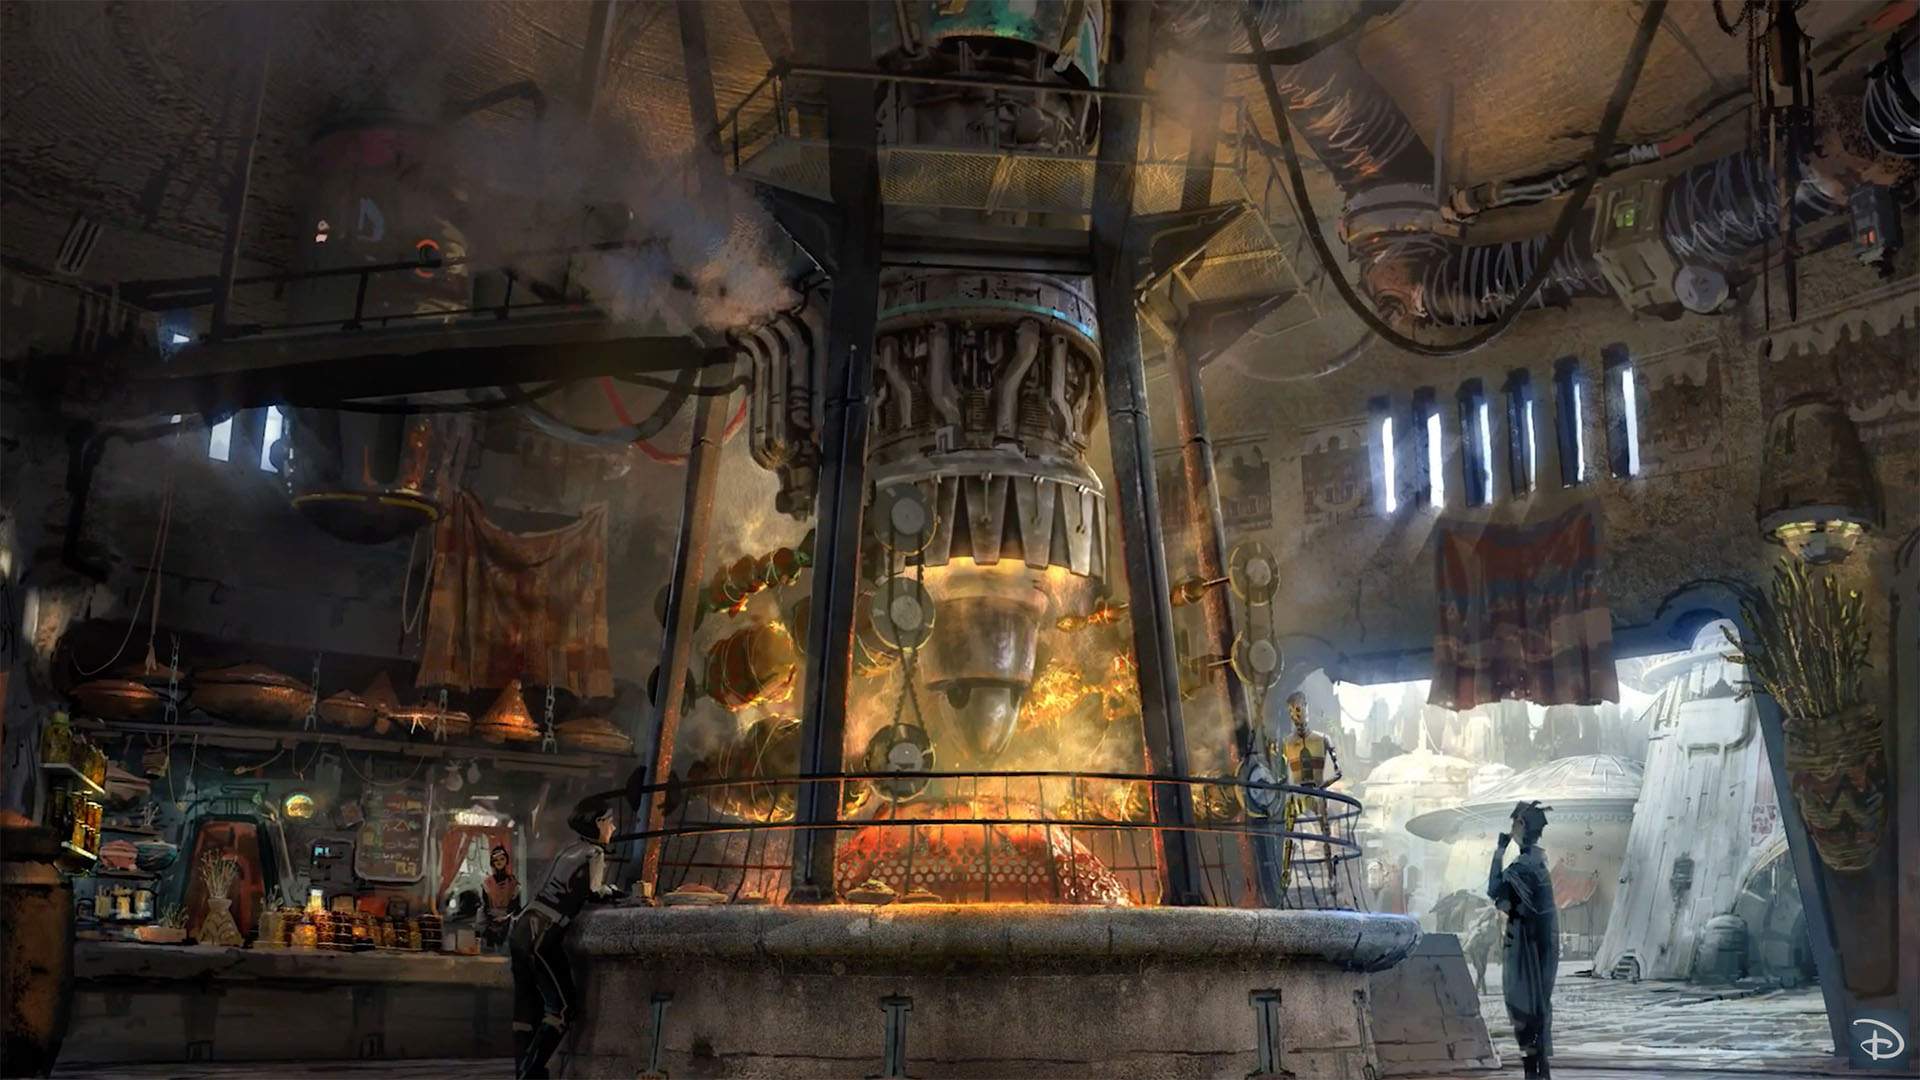 Disney Has Released More Details About Its New 'Star Wars' Theme Parks